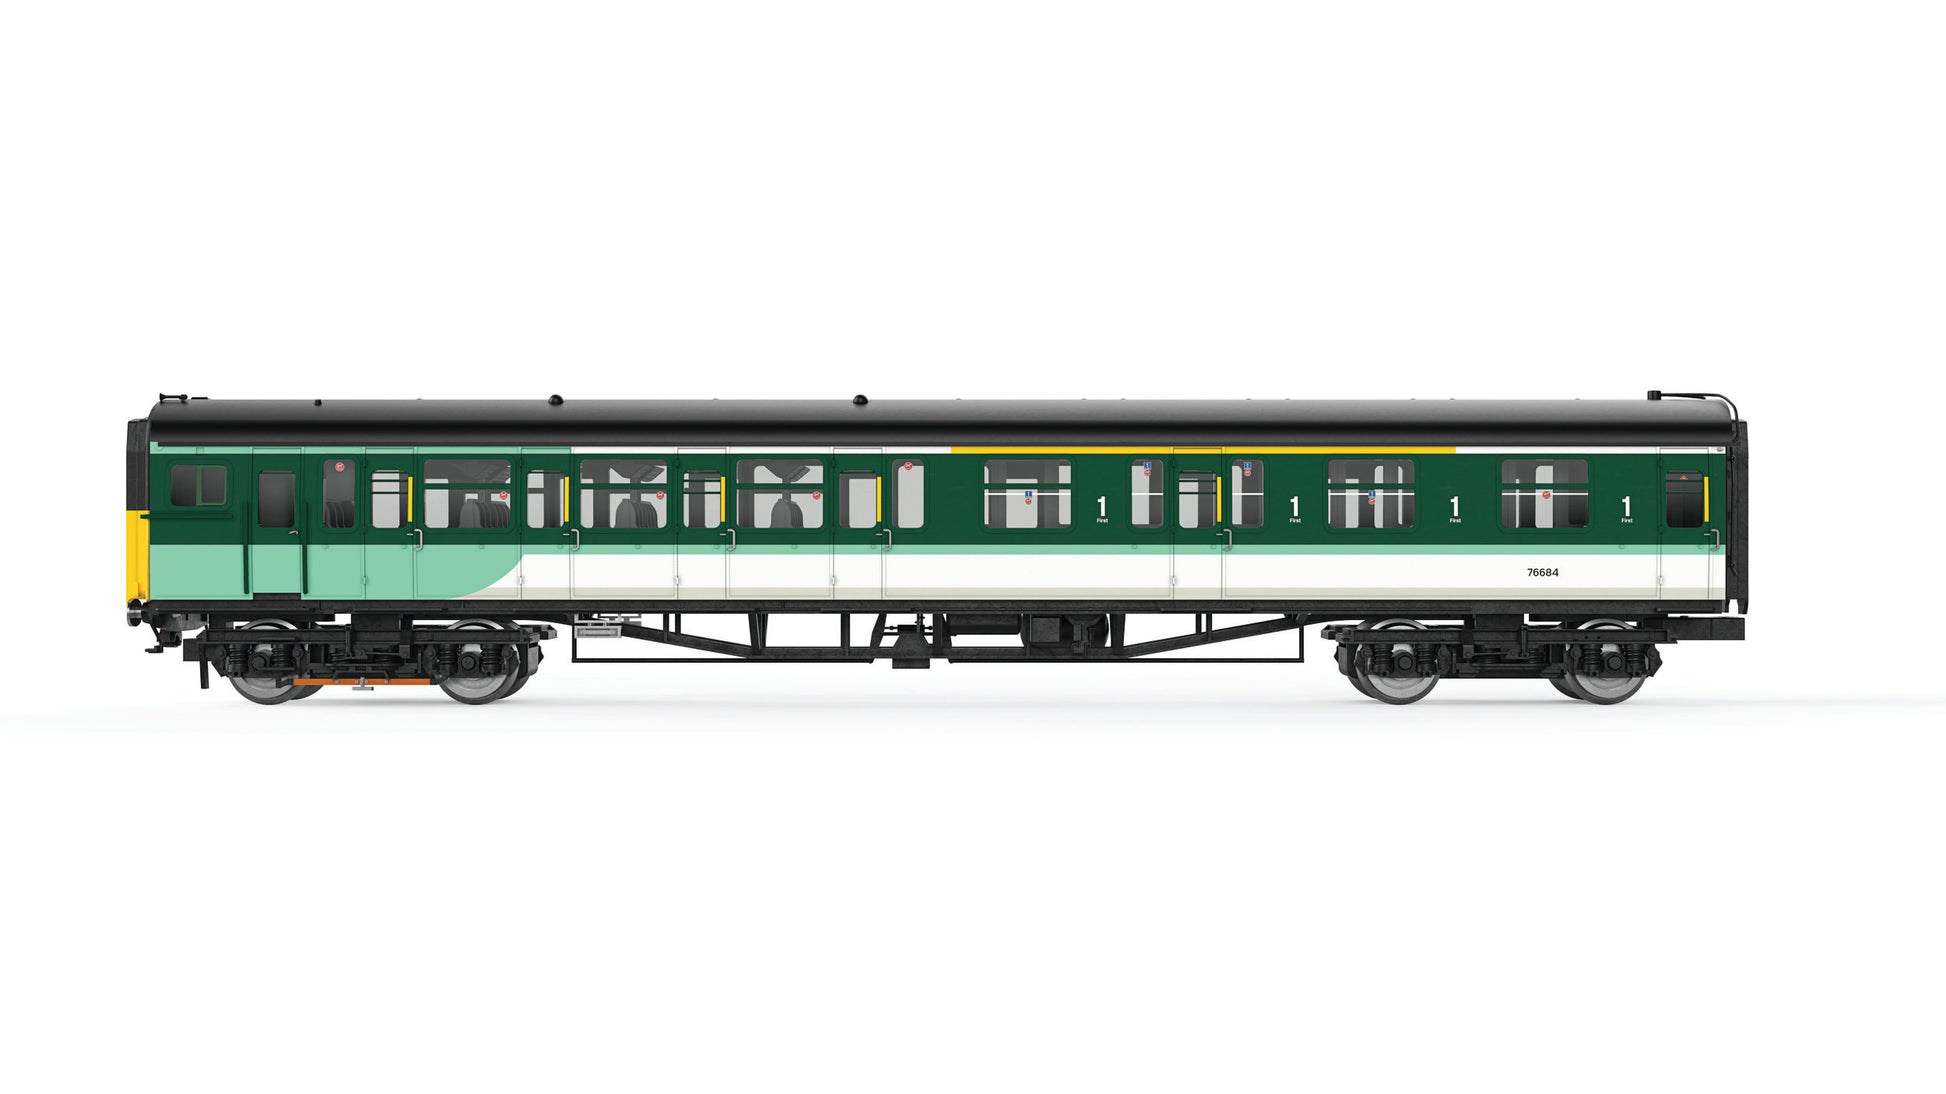 Hornby R30106 Southern Class 423 4-VEP EMU Train Pack - Era 10 - Chester Model Centre